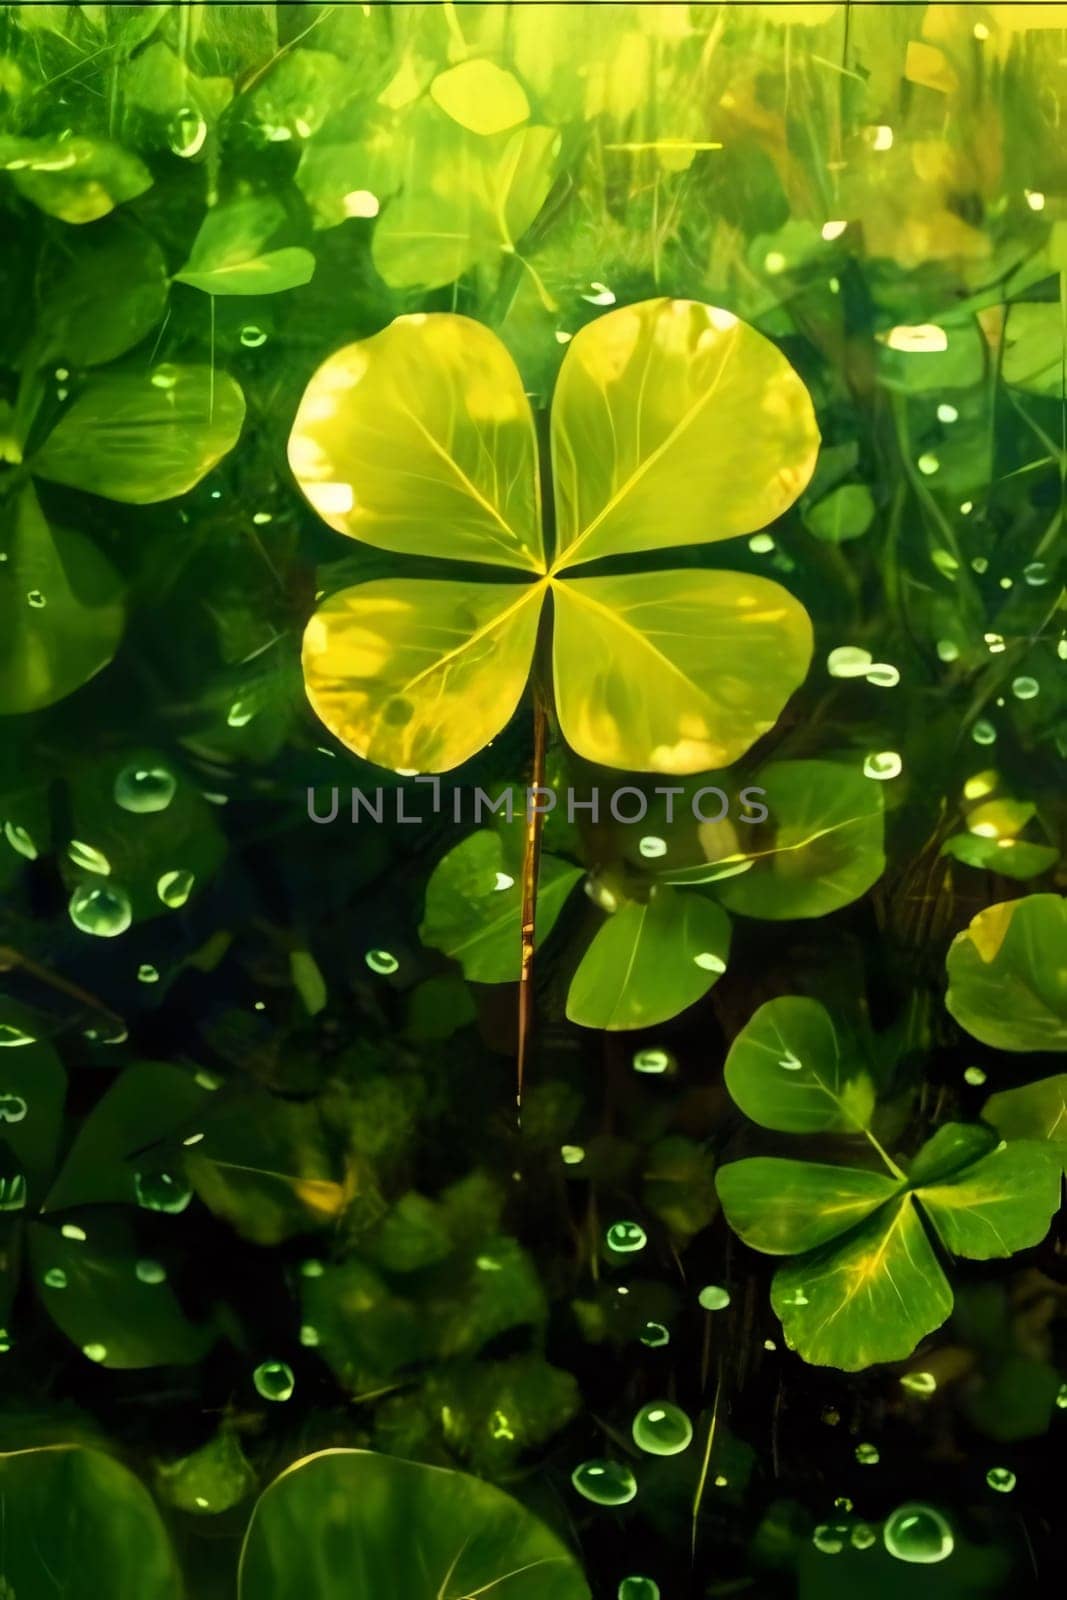 Illustration four-leaf green clover around dewdrops, water green leaves. Green four-leaf clover symbol of St. Patrick's Day. A joyous time of celebration in the green color.